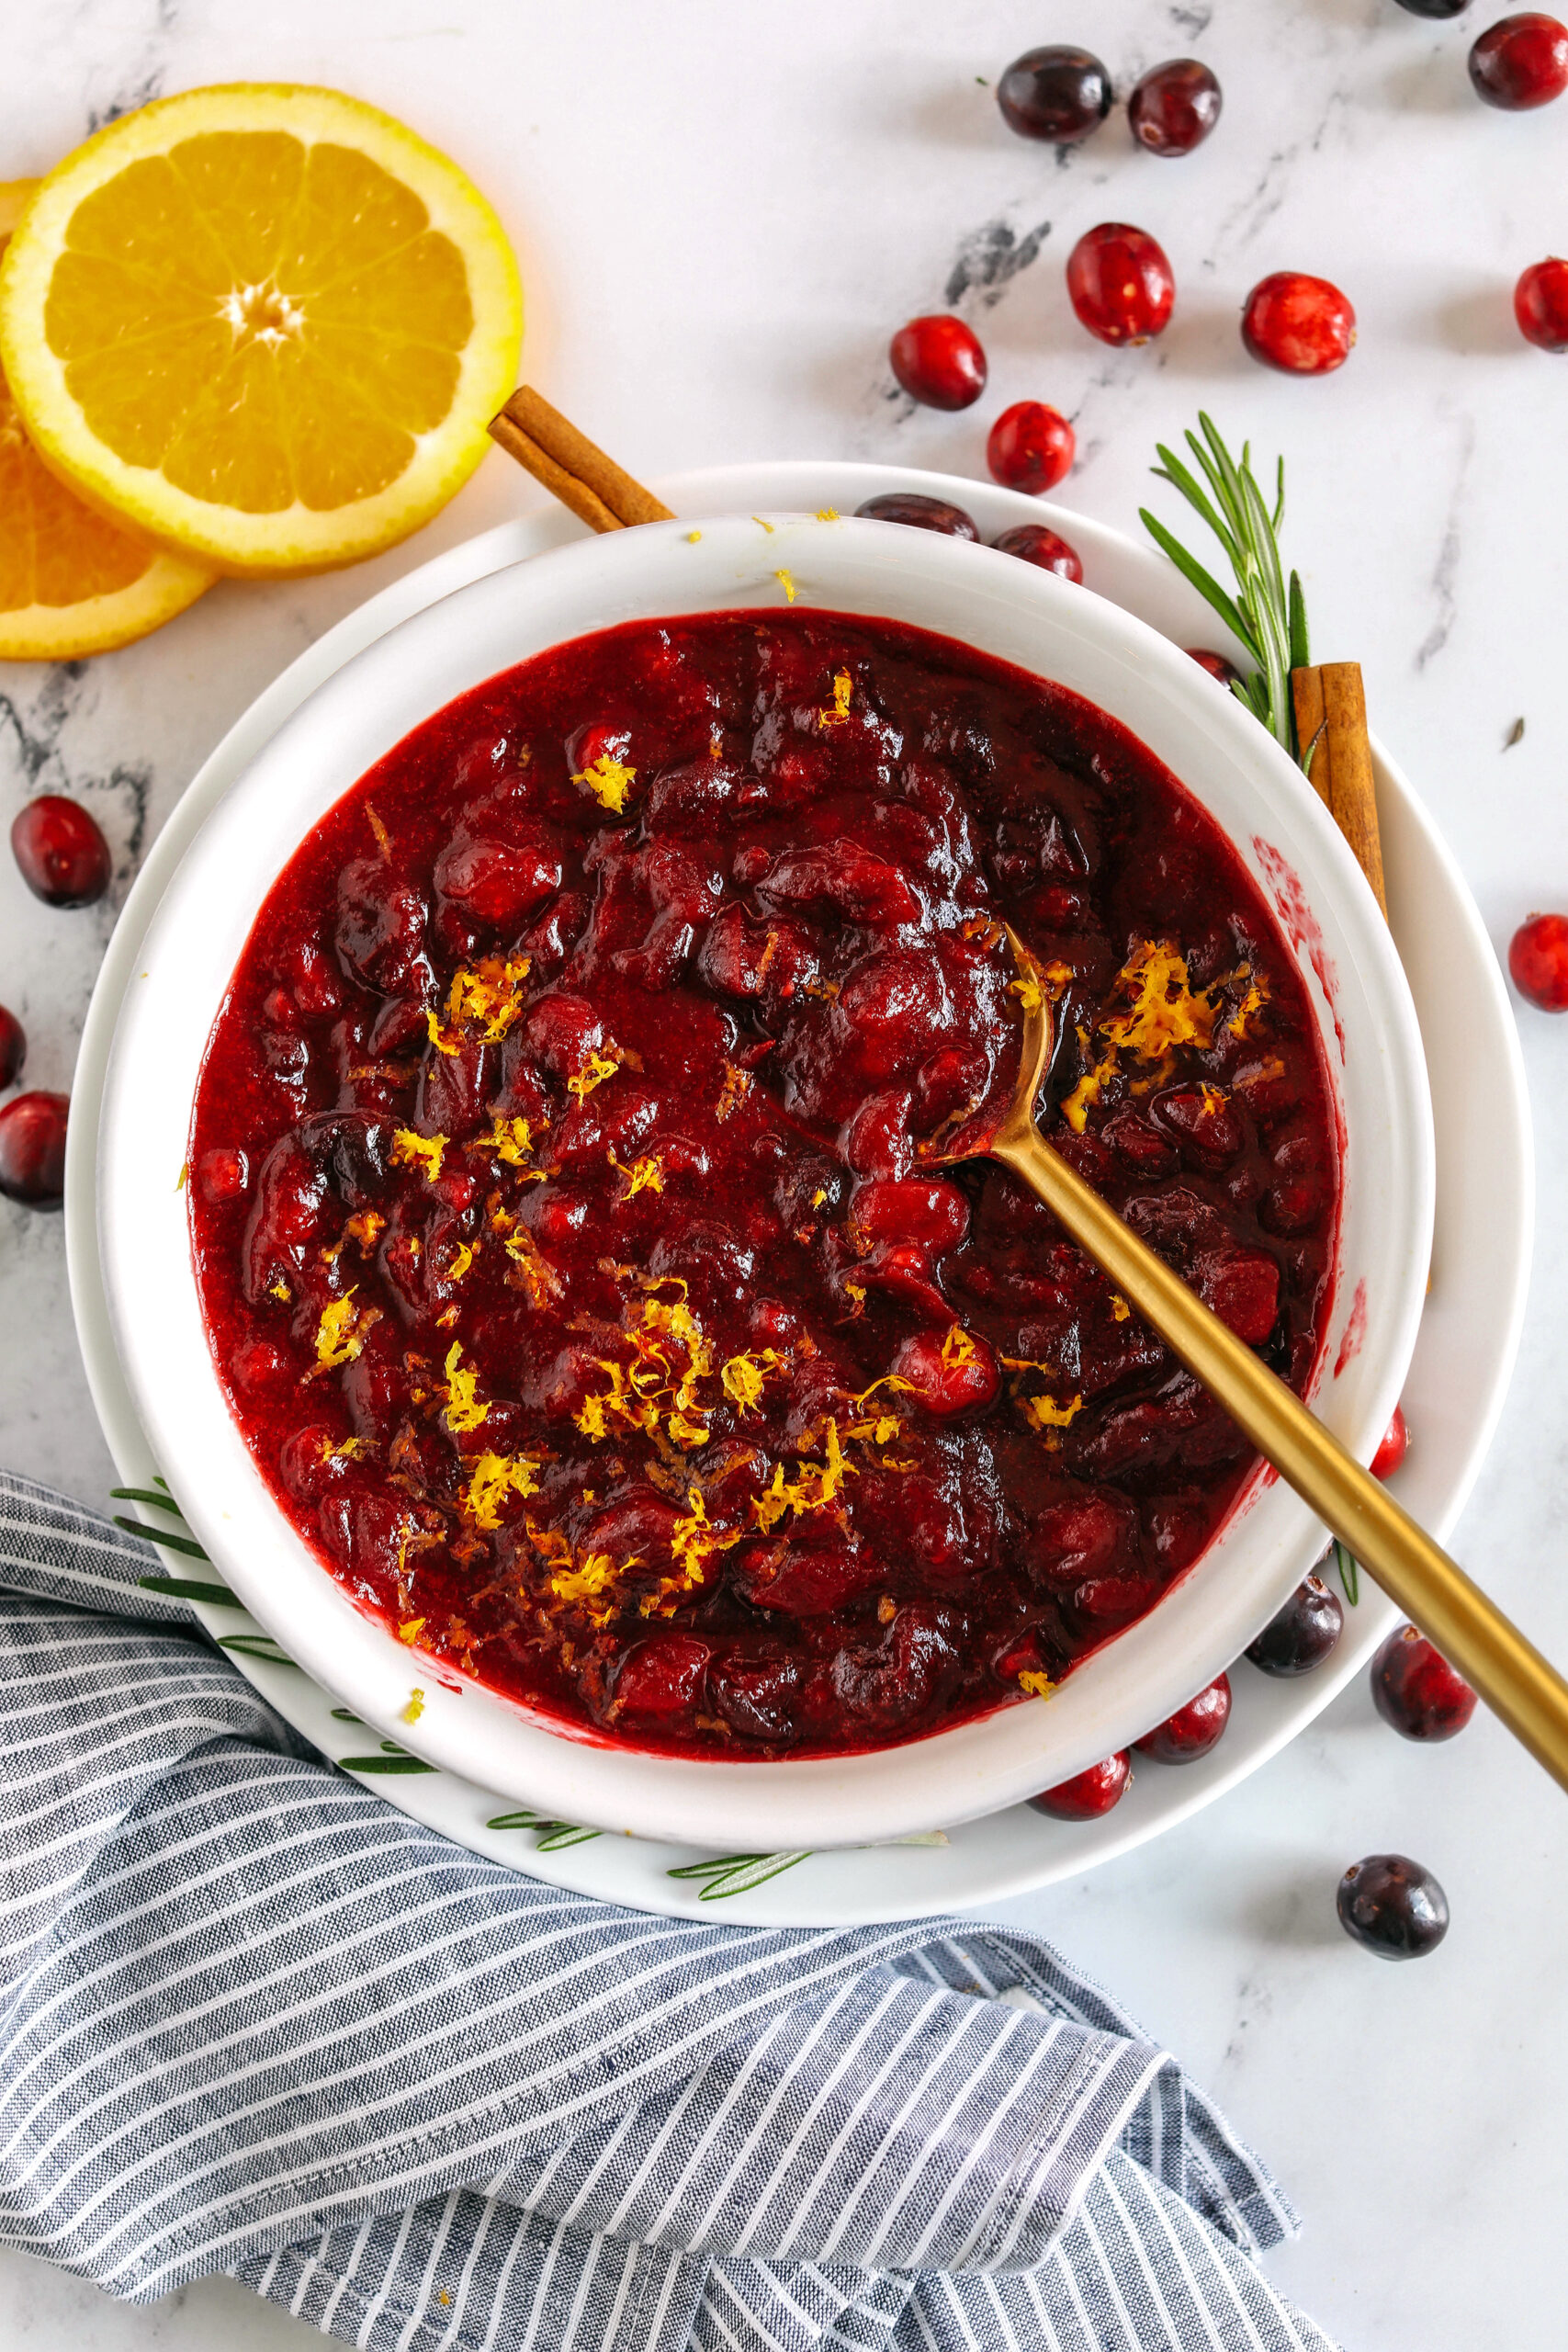 This Healthy Cranberry Sauce is naturally sweetened made with maple syrup, fresh orange juice, cinnamon, ginger and deep rich flavors from a little port wine.  Sweet, tangy and the perfect addition to your Thanksgiving and Christmas table this season!